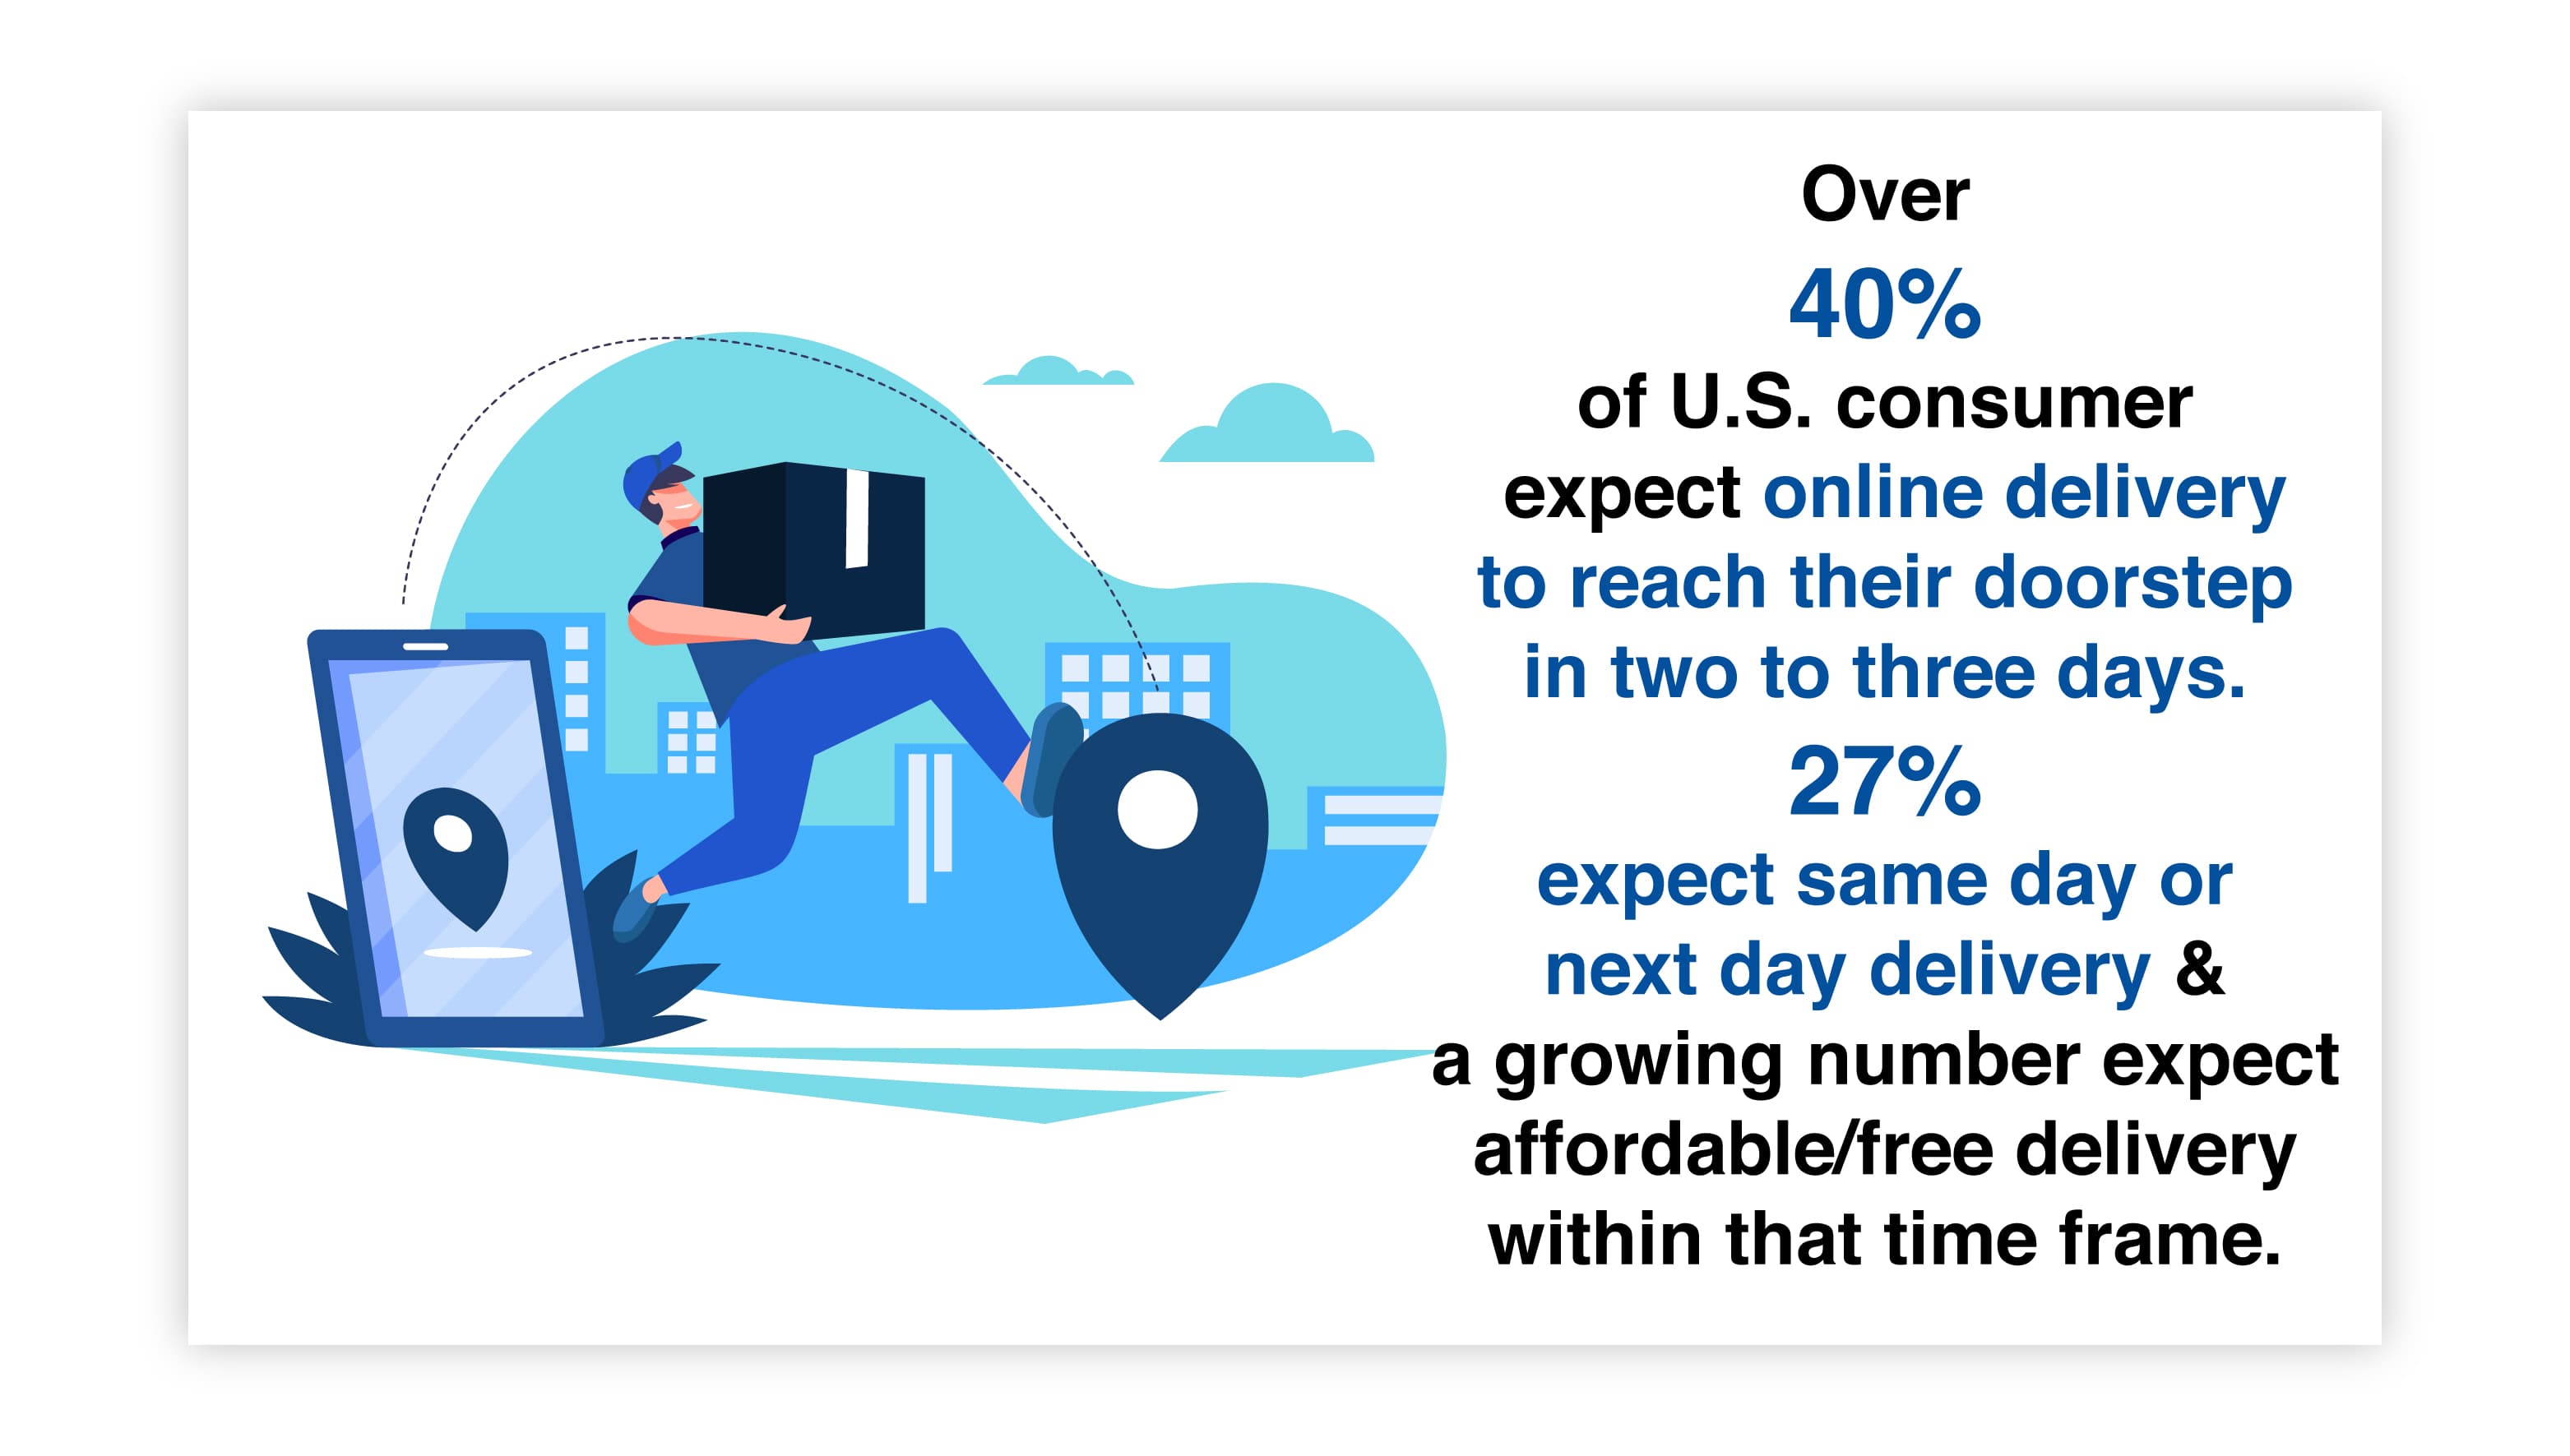 U.S. consumer expect online delivery